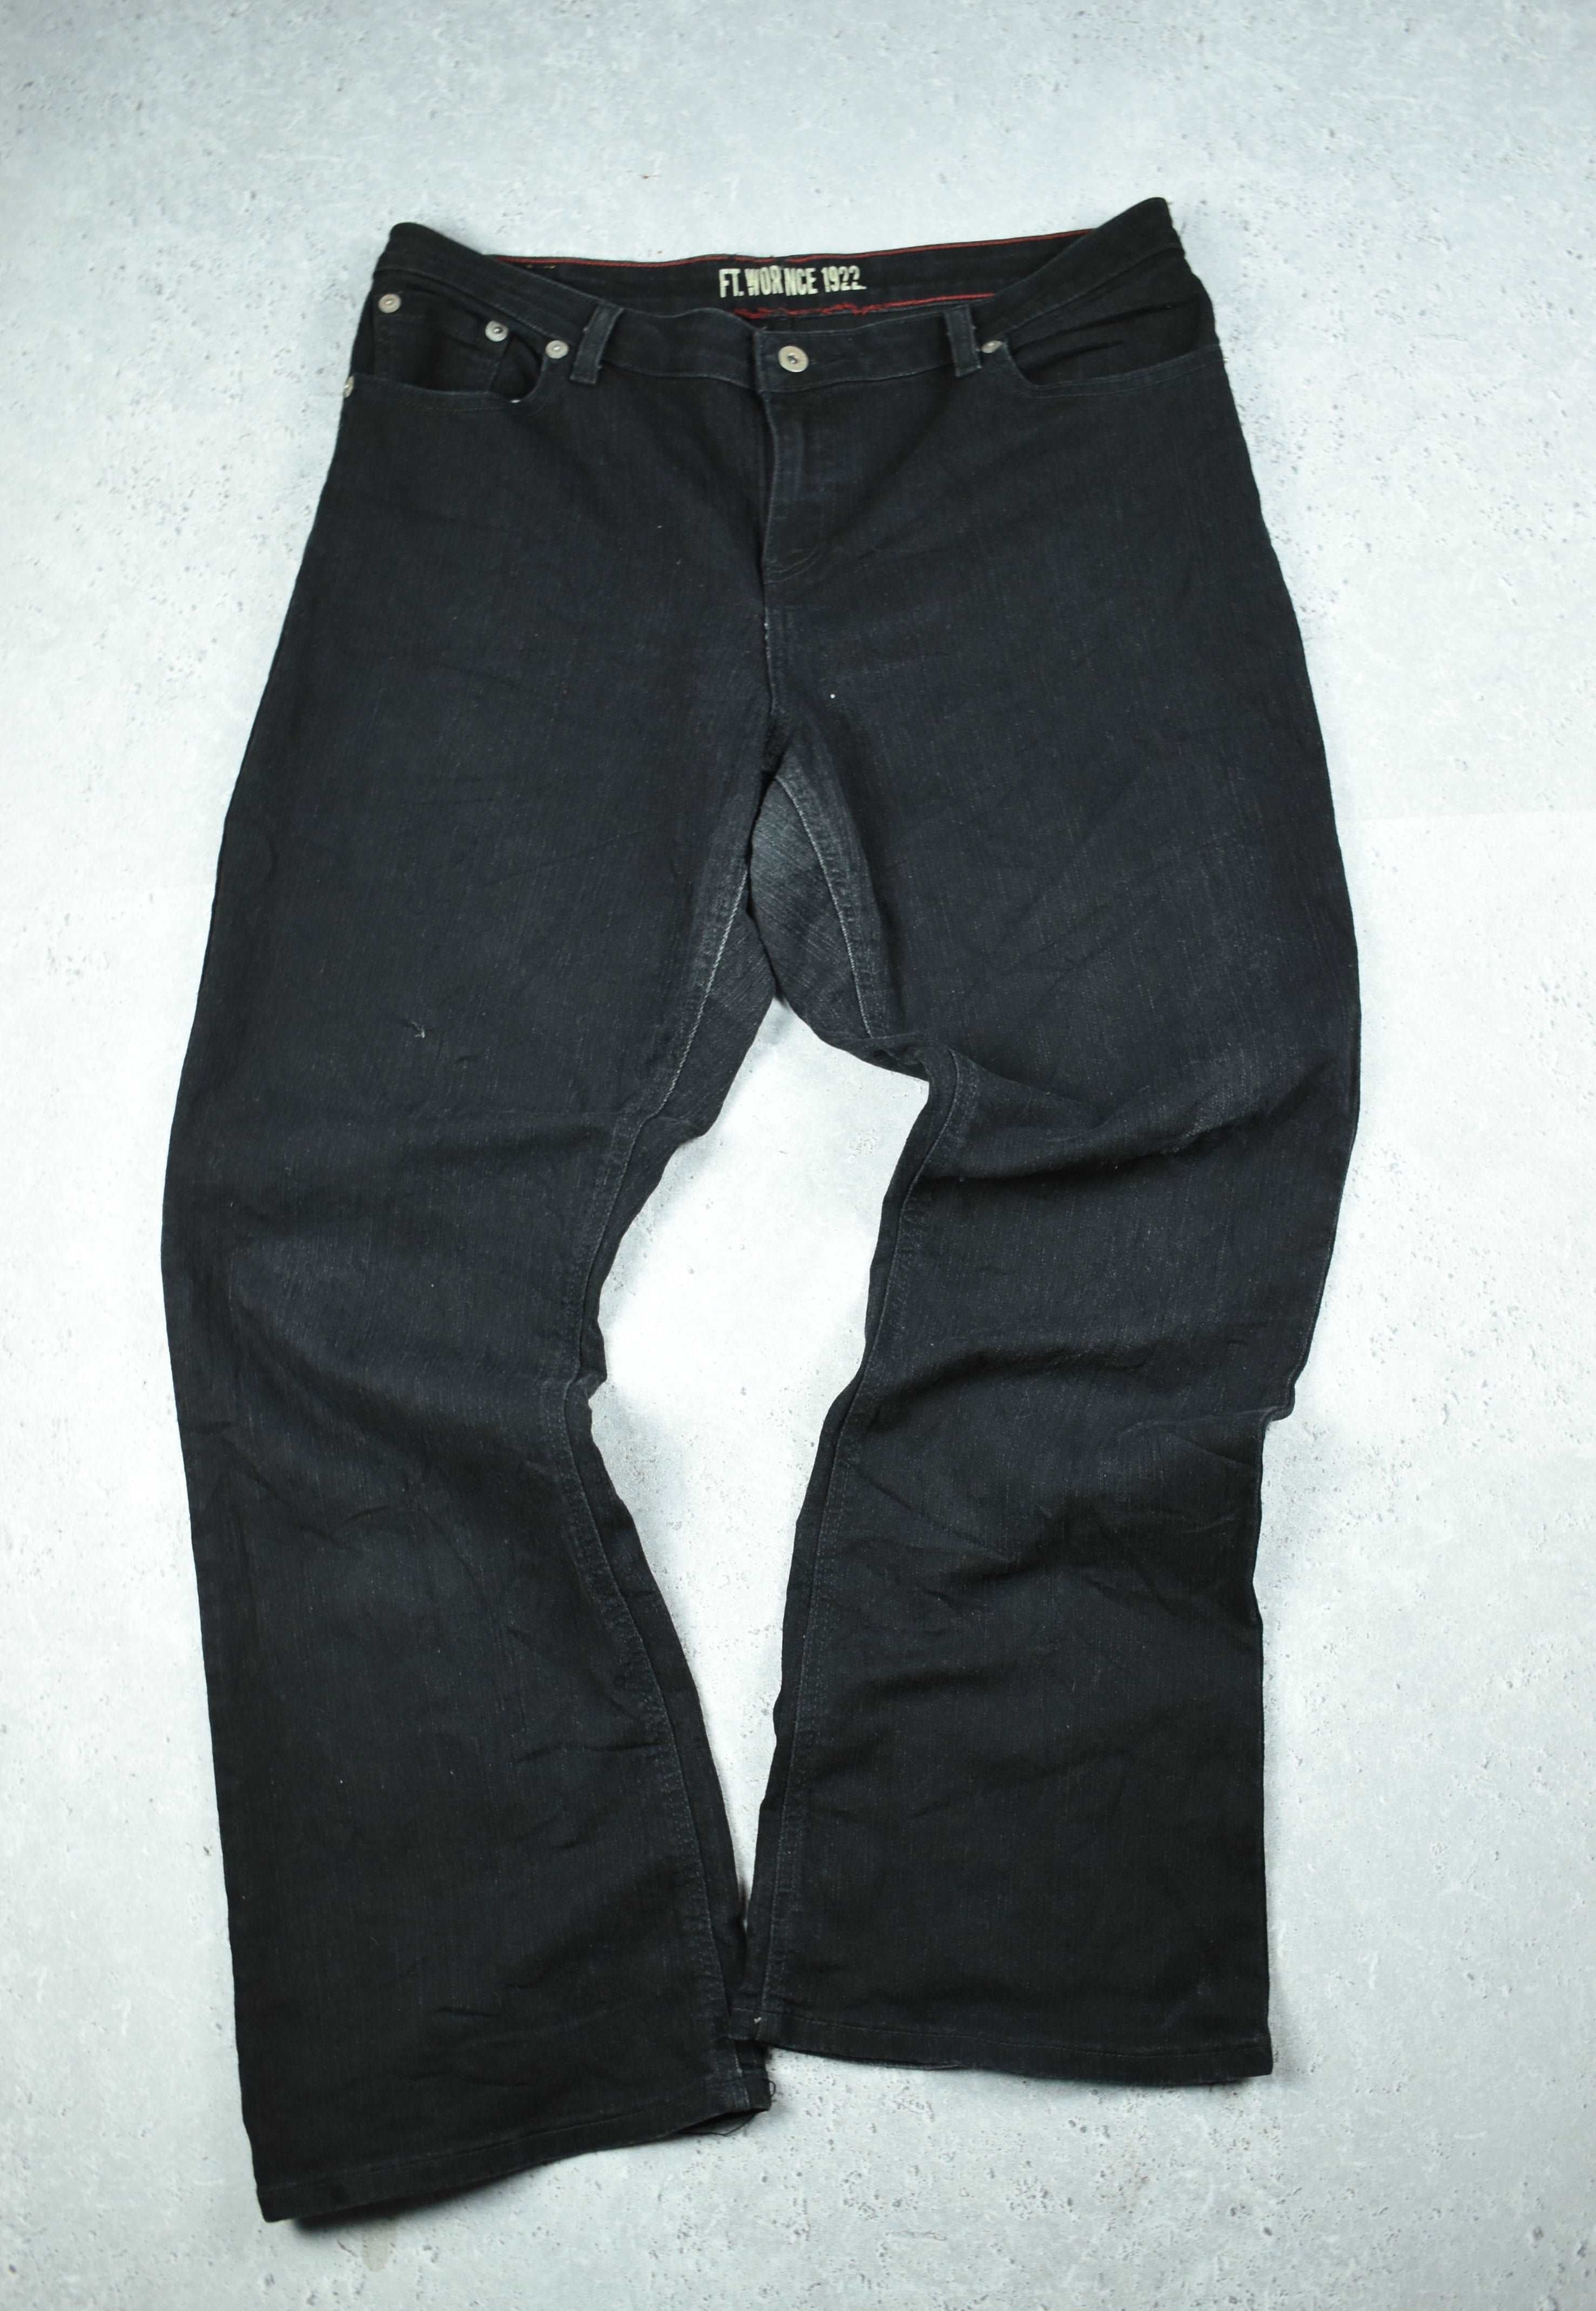 Vintage Dickies Relaxed Fit Jeans Black 36x30